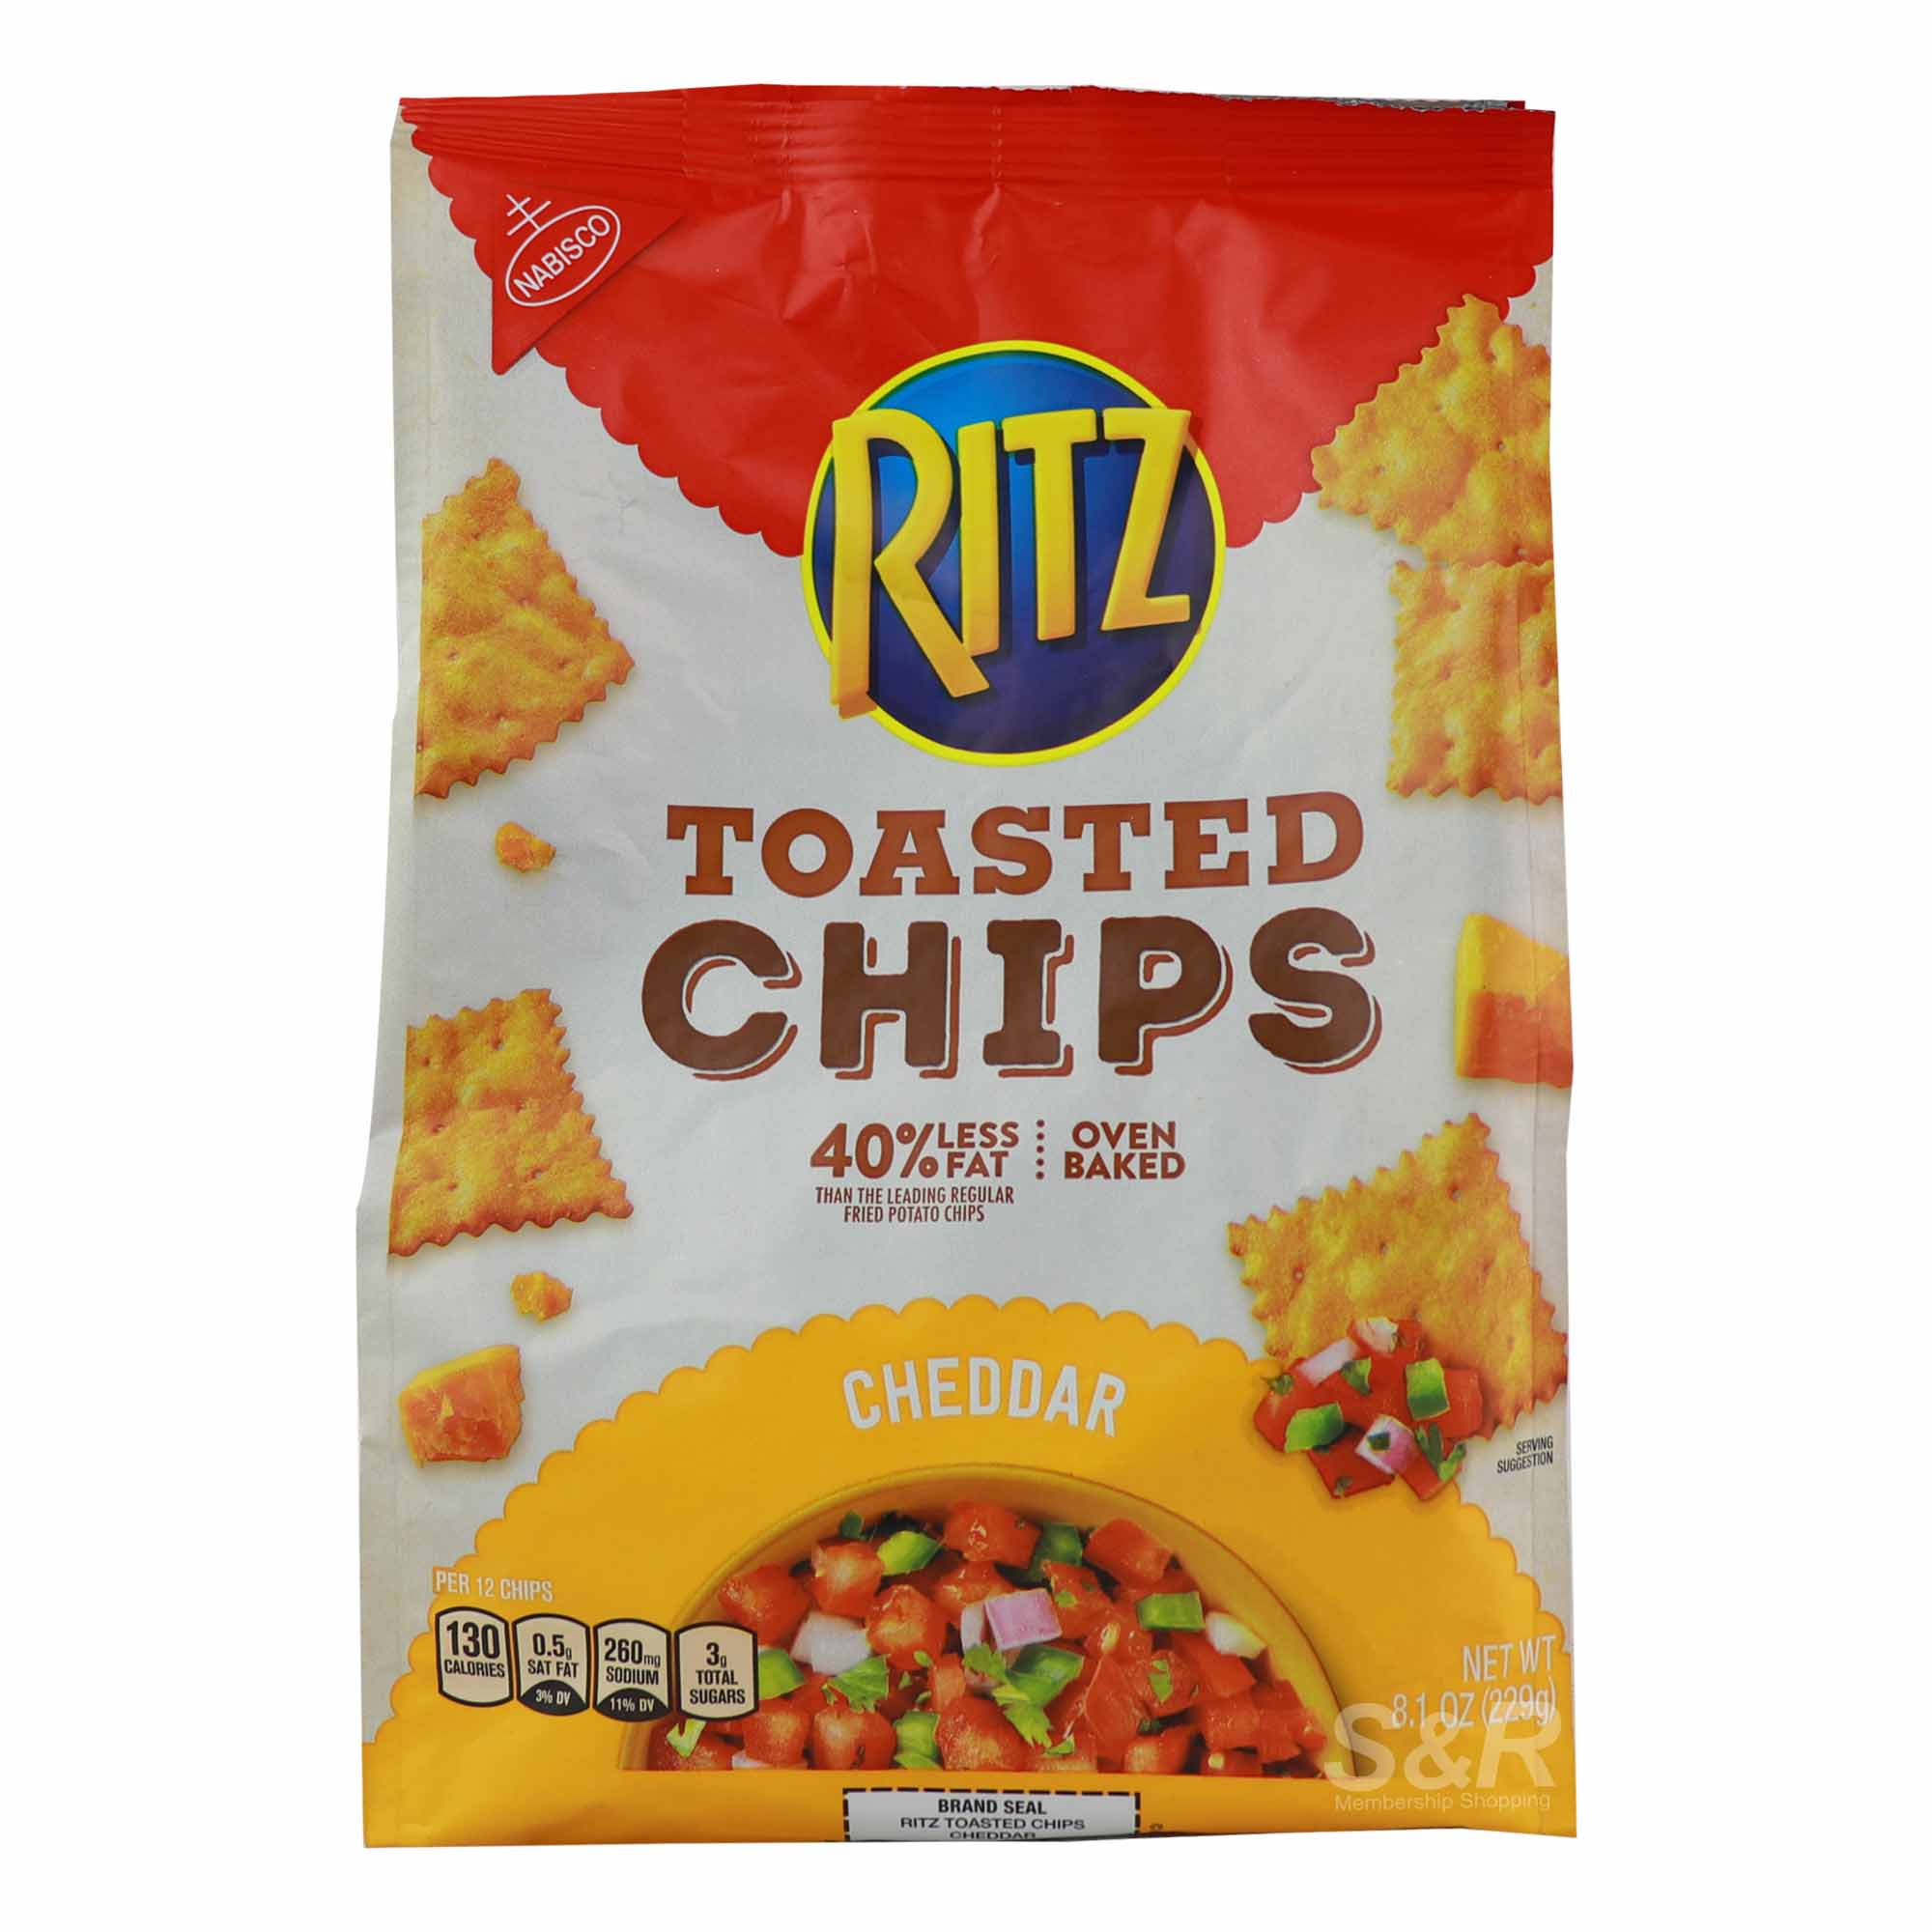 Ritz Toasted Chips in Cheddar 229g